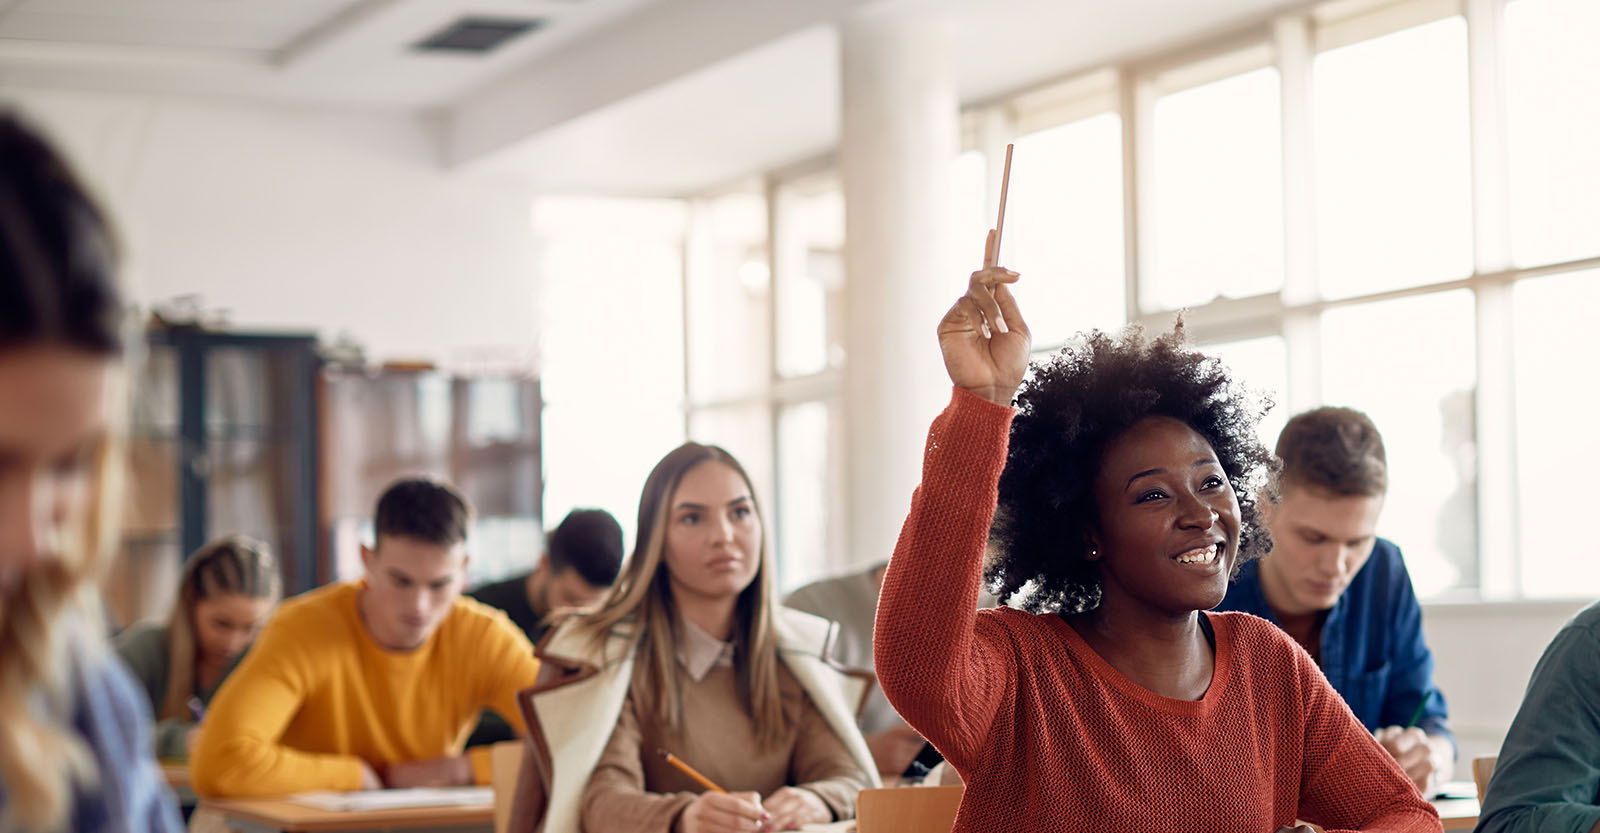 A student is raising their hand with a pencil in a classroom